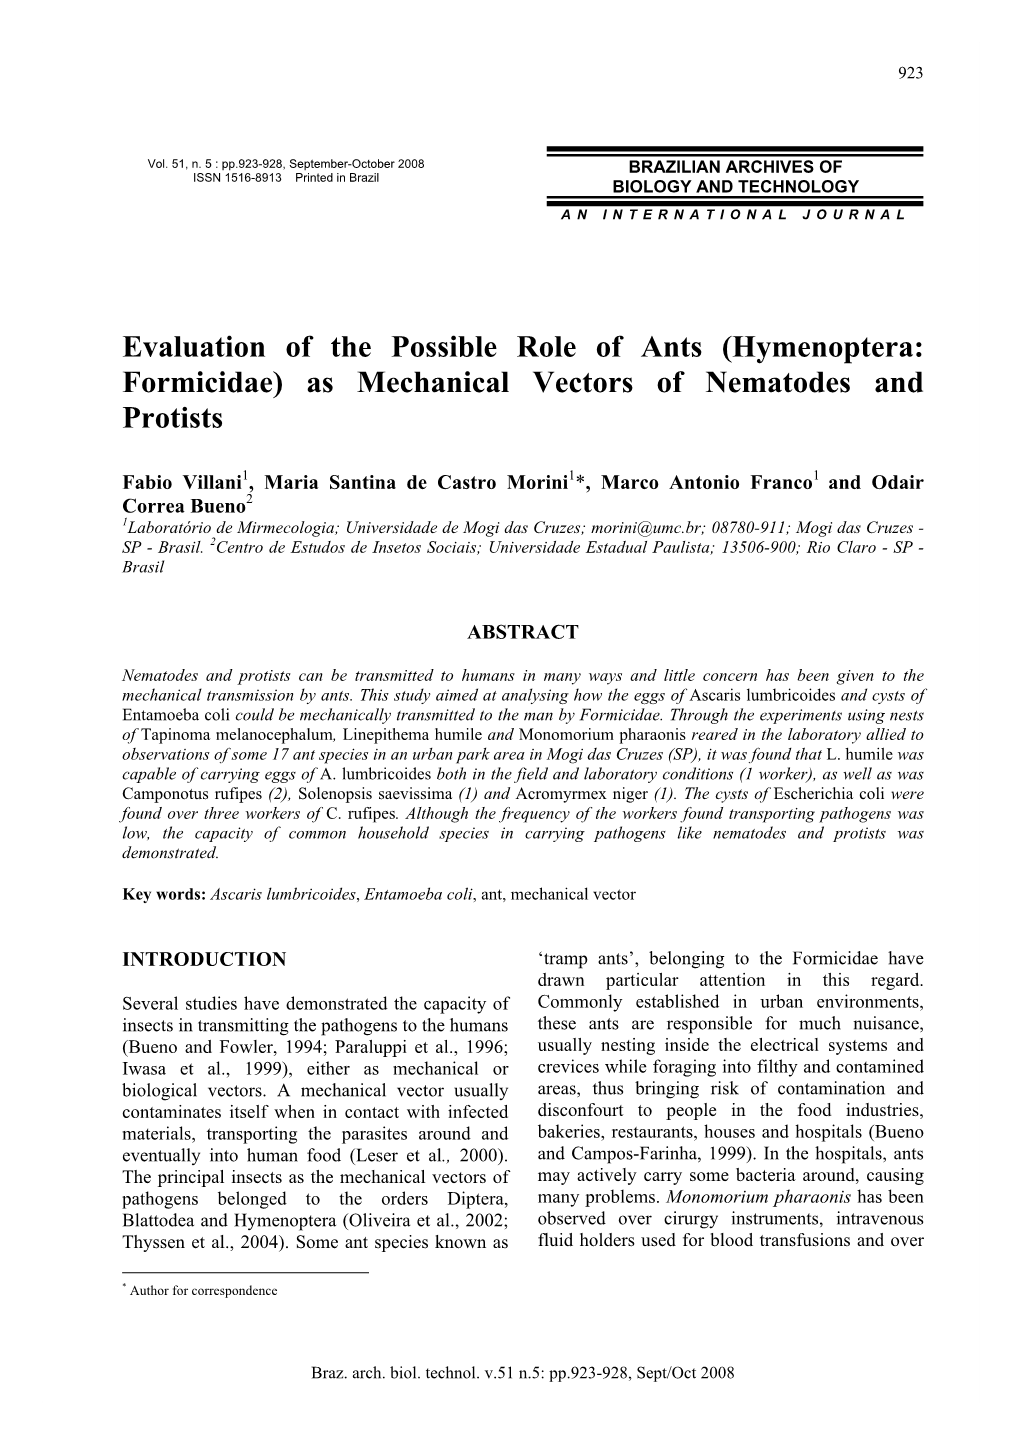 Hymenoptera: Formicidae) As Mechanical Vectors of Nematodes and Protists